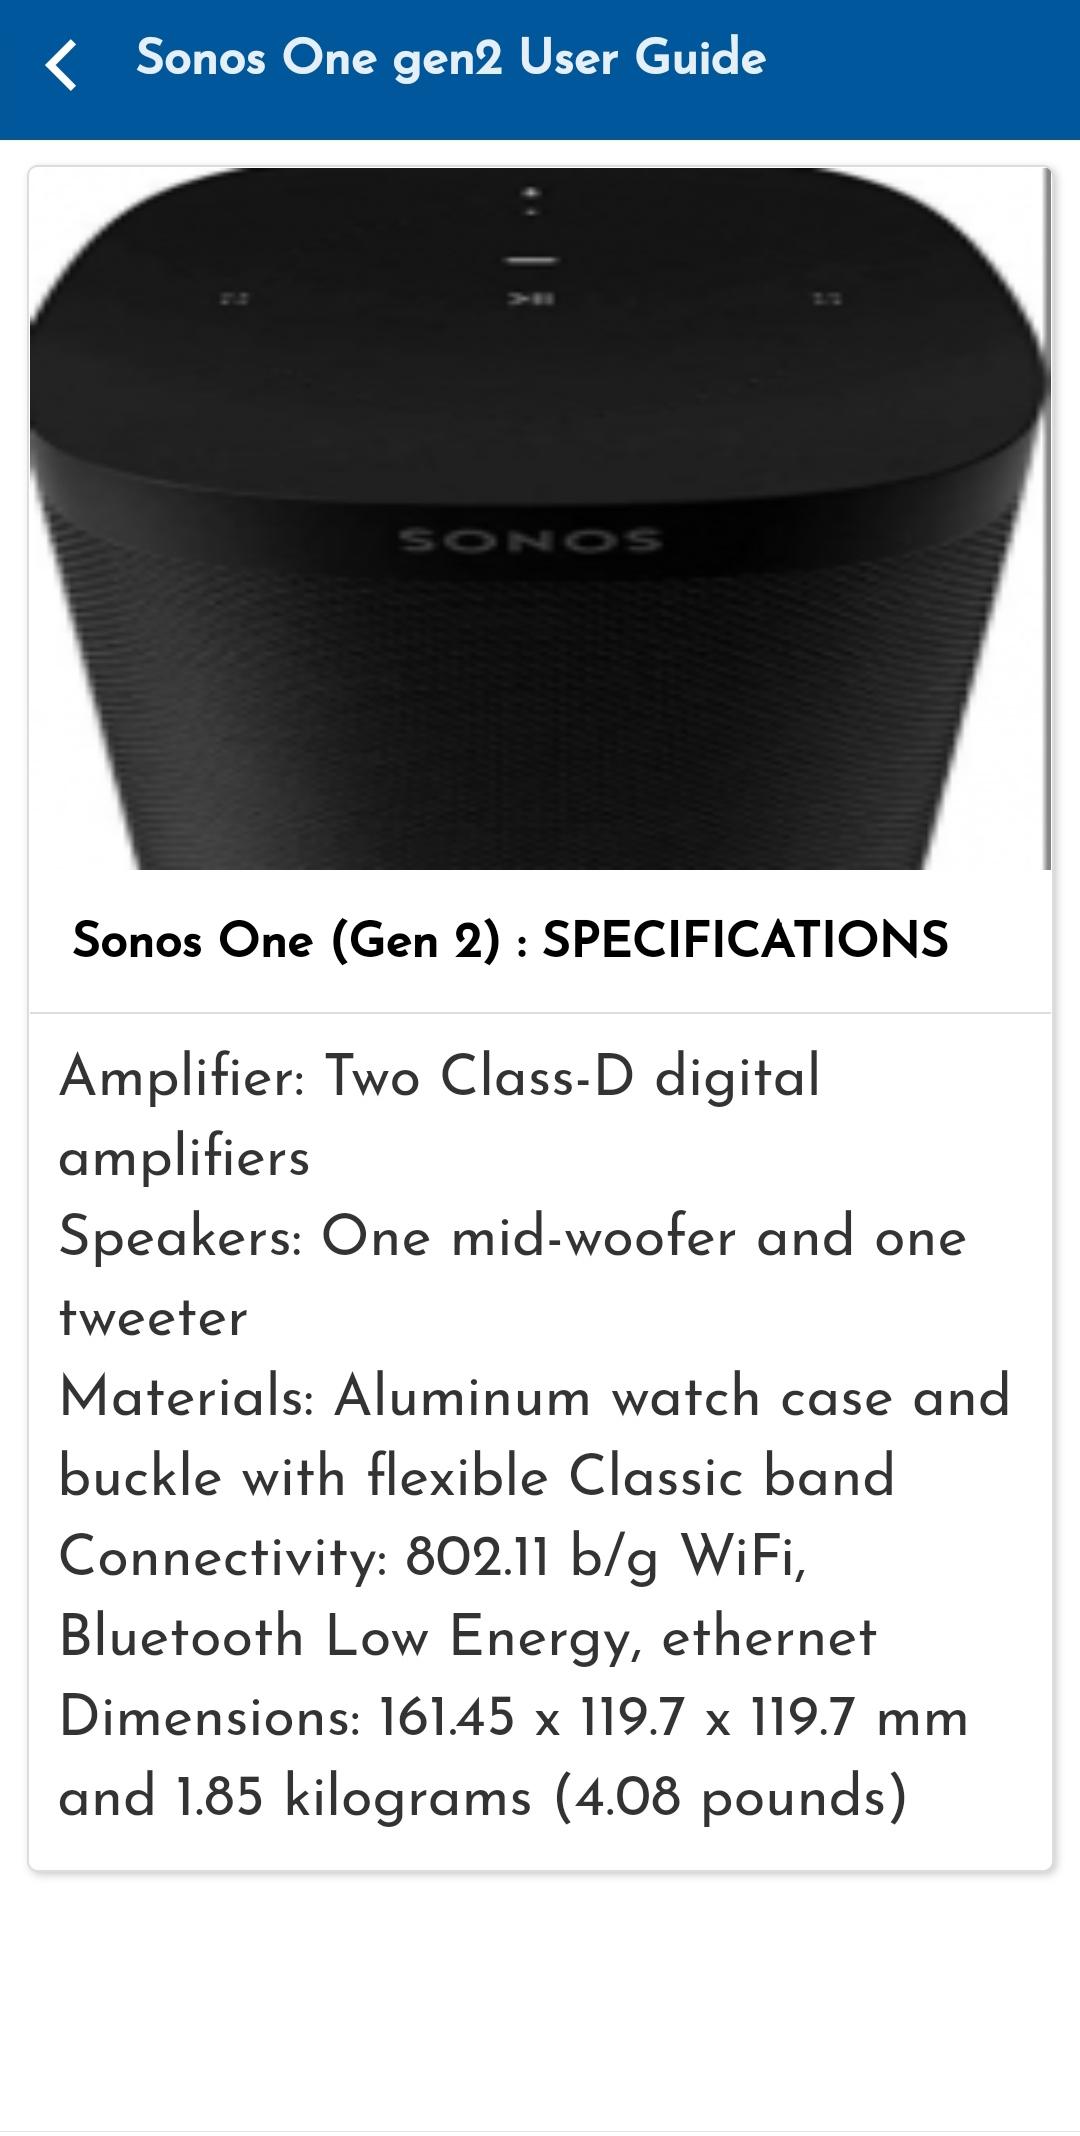 Sonos One gen2 User Guide for Android - APK Download